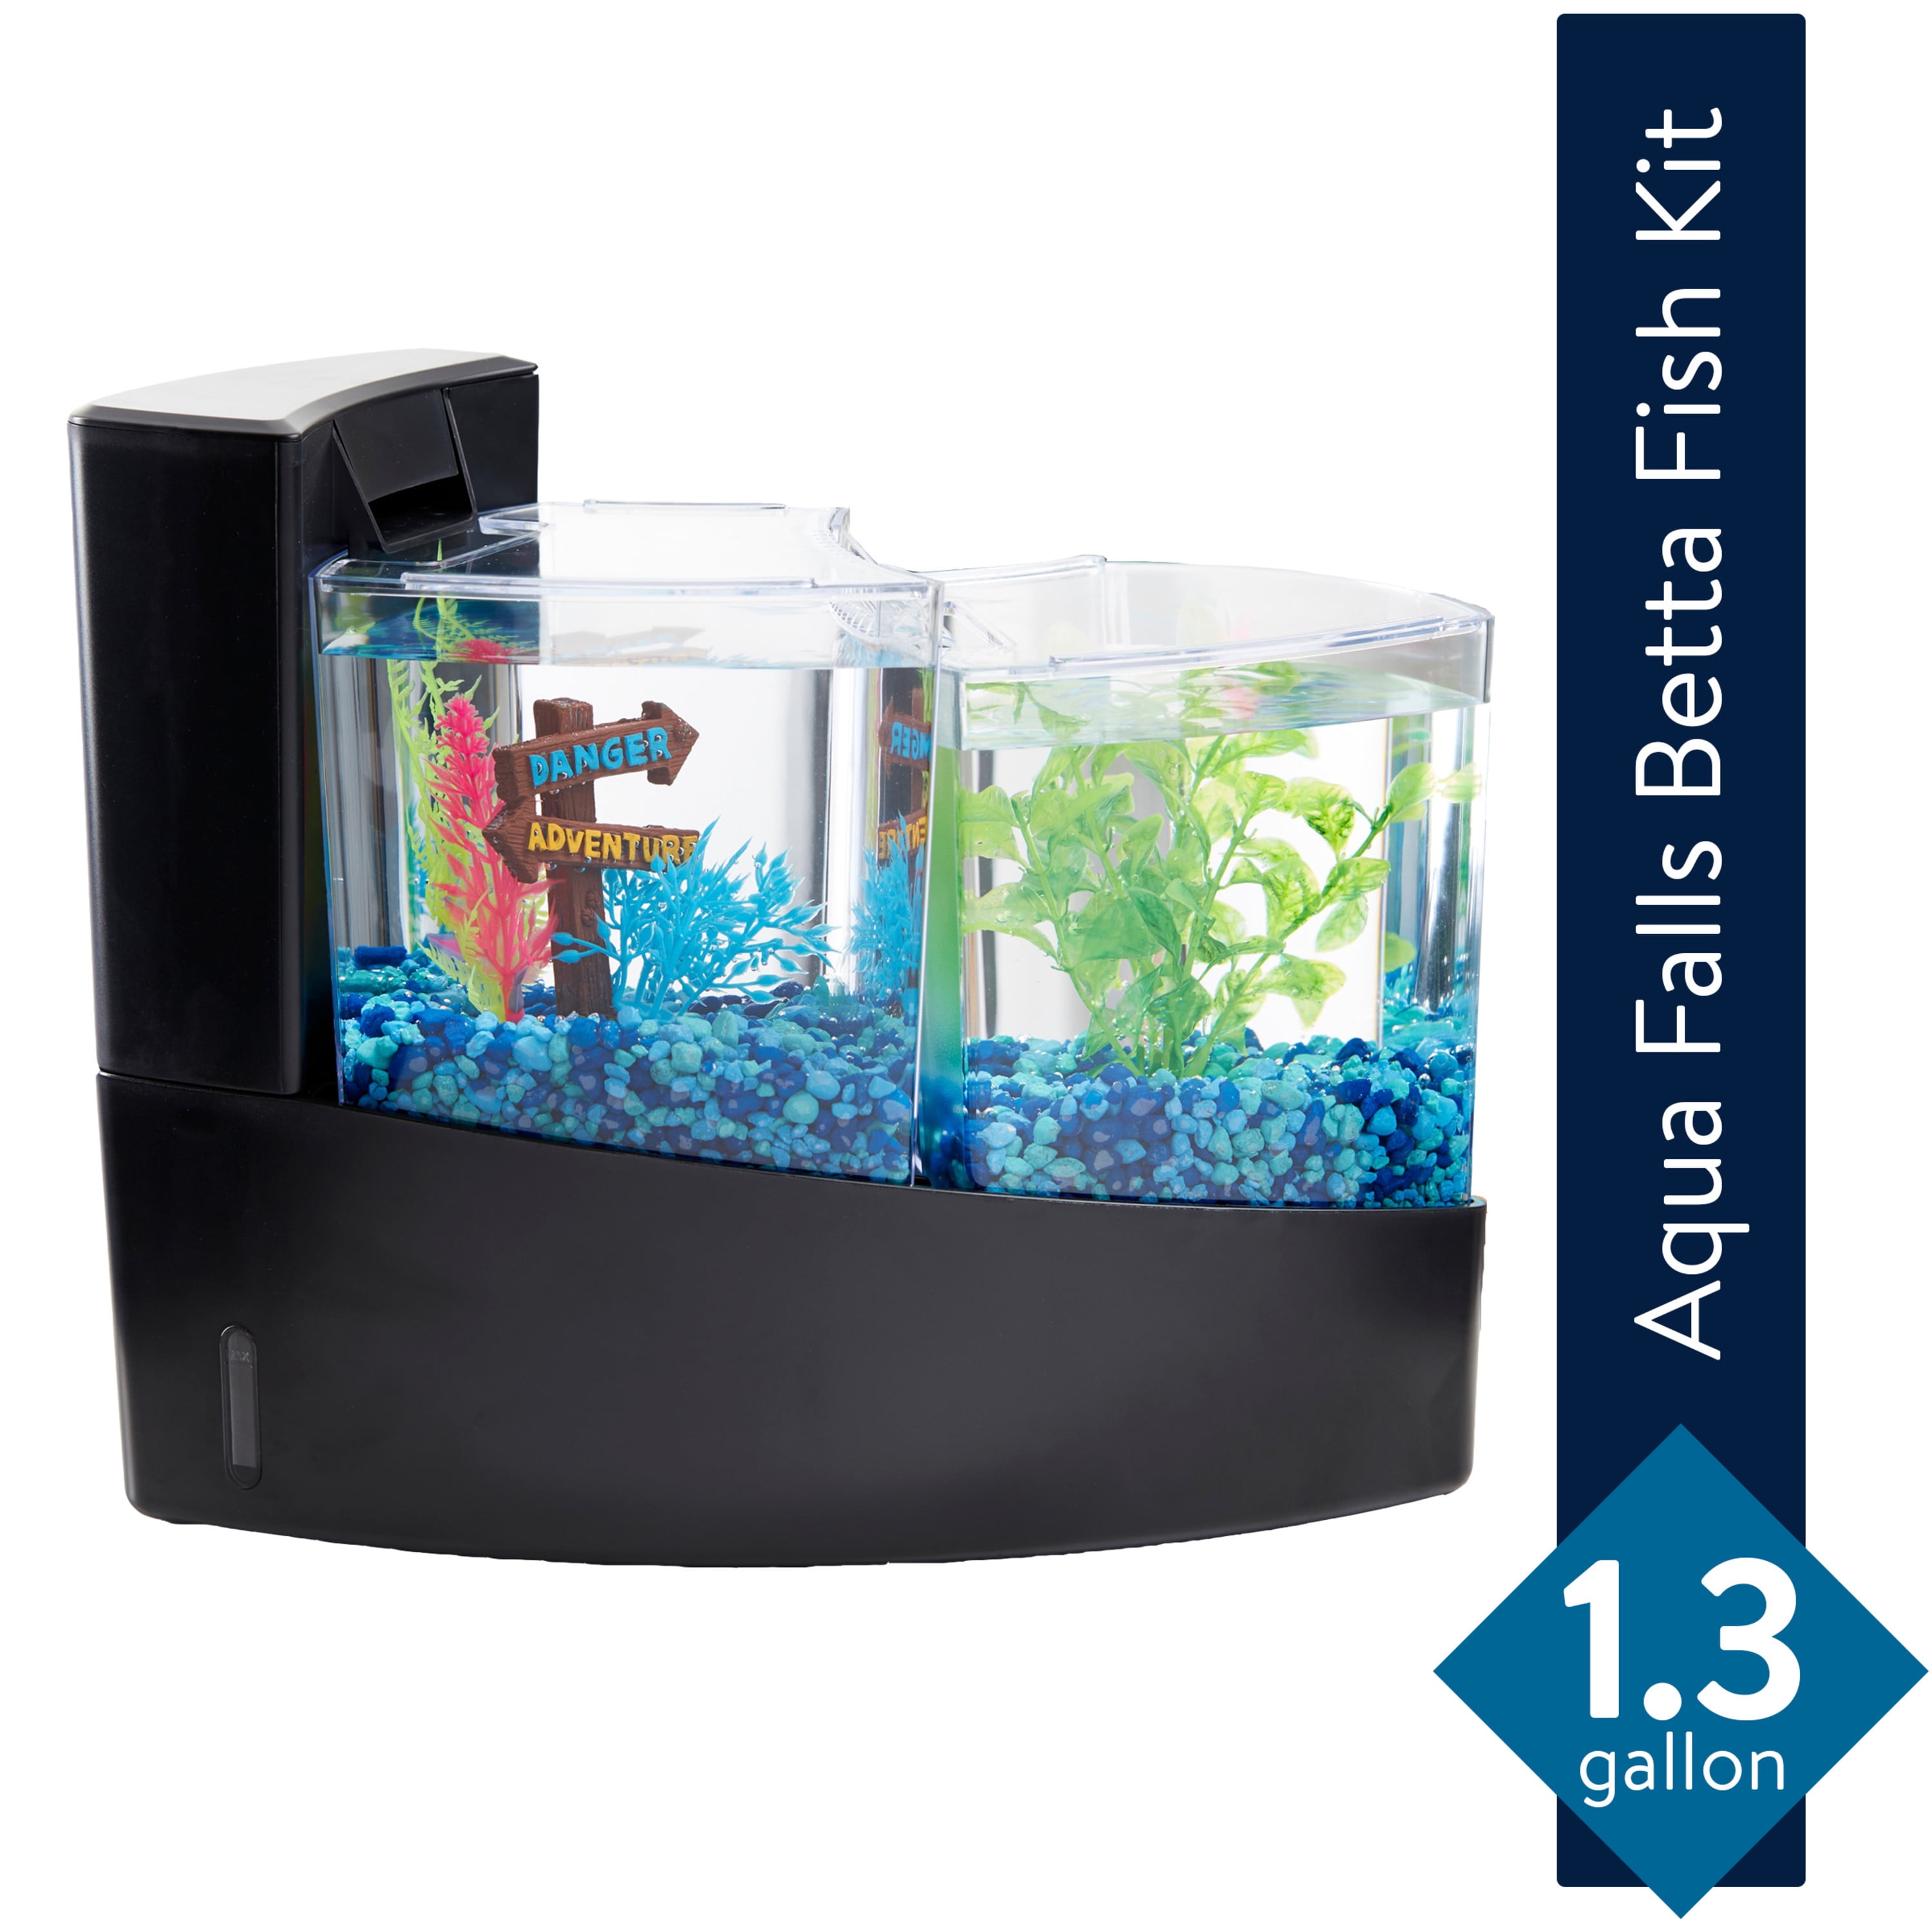 Aqua 3-Gallon 360 View Aquarium Kit with LED Lighting and Filter, Ideal for a Variety of Tropical Fish - Walmart.com